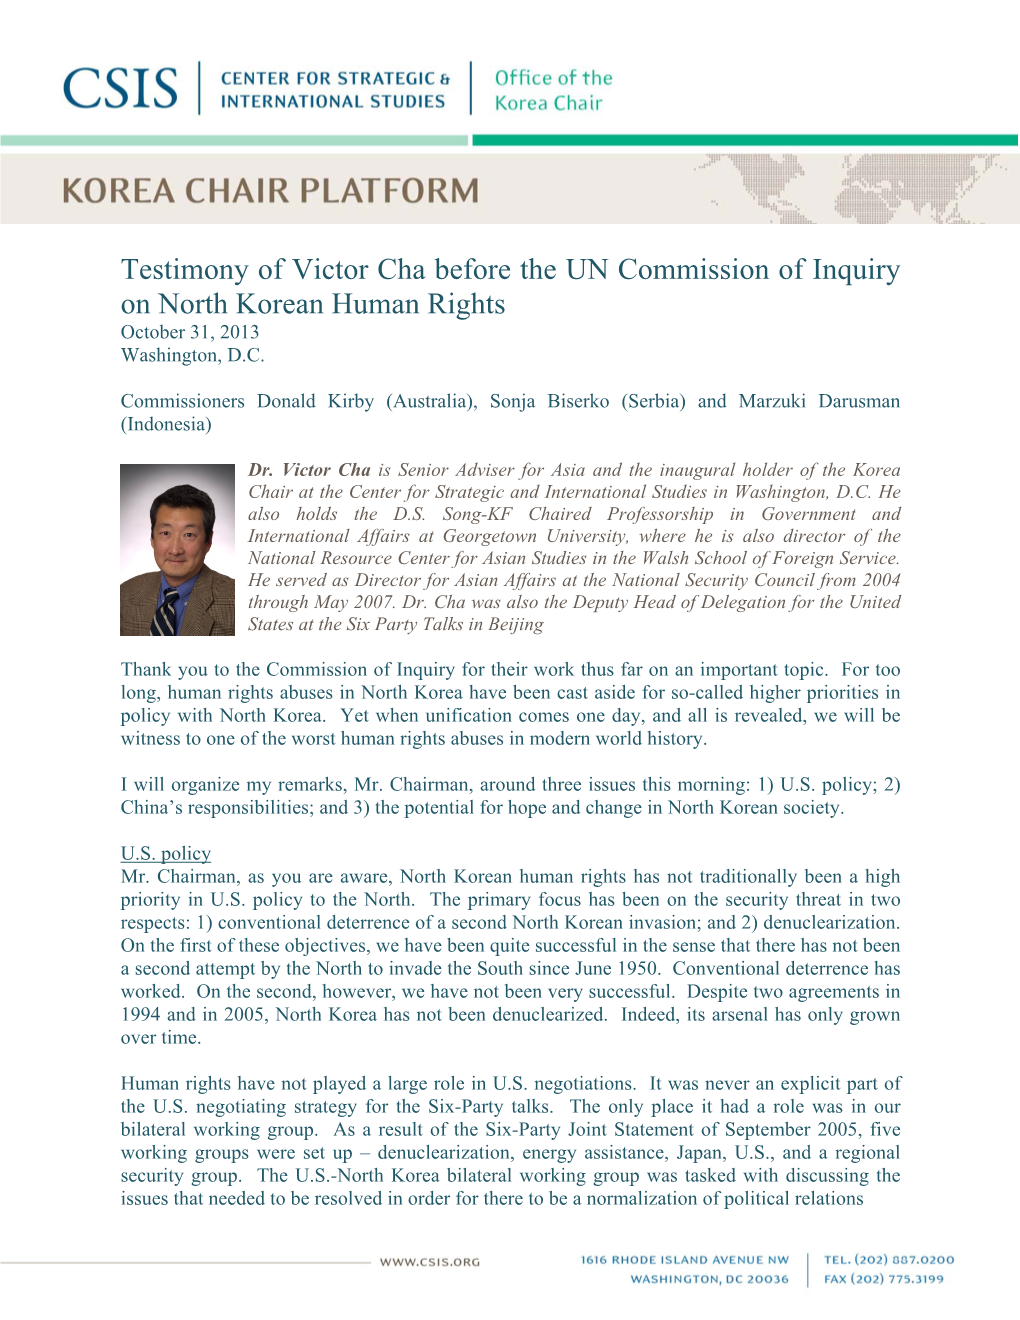 Testimony of Victor Cha Before the UN Commission of Inquiry on North Korean Human Rights October 31, 2013 Washington, D.C